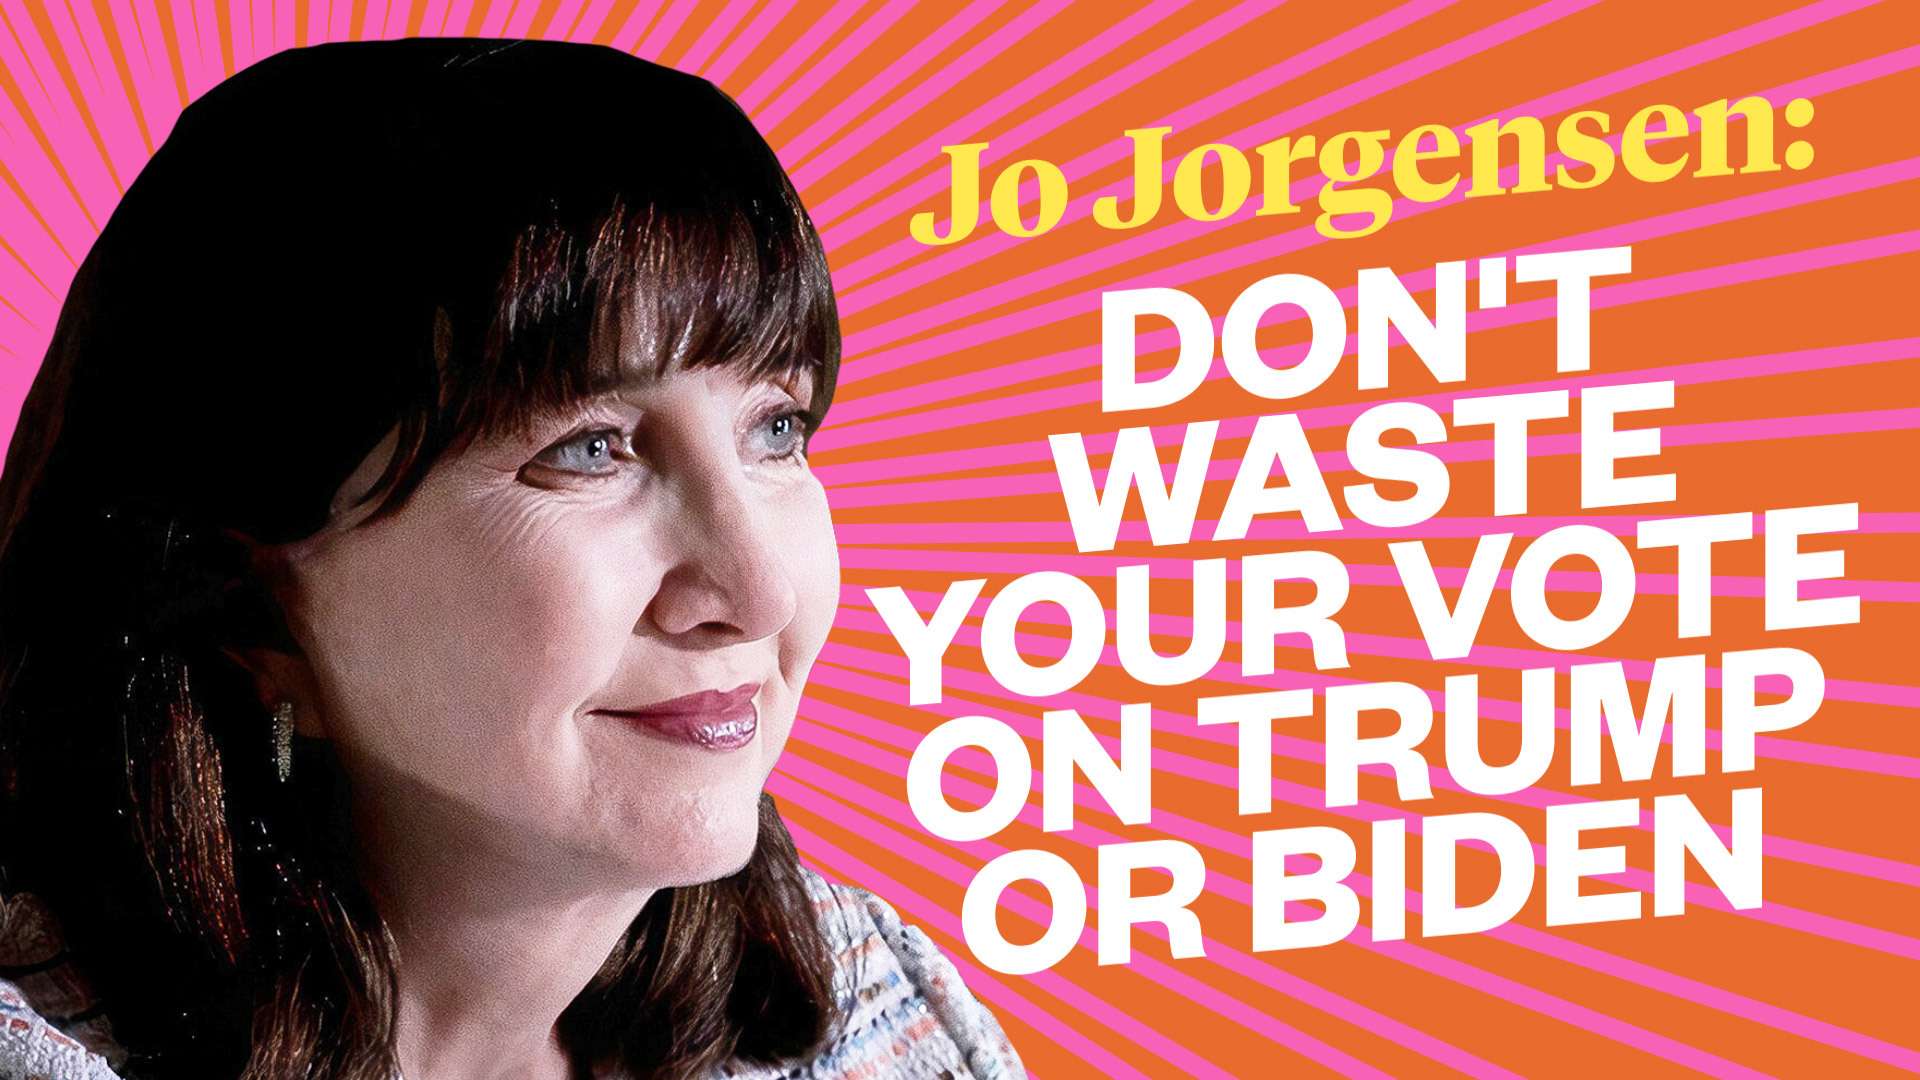 Libertarian Party Candidate Jo Don't Waste Your Vote on